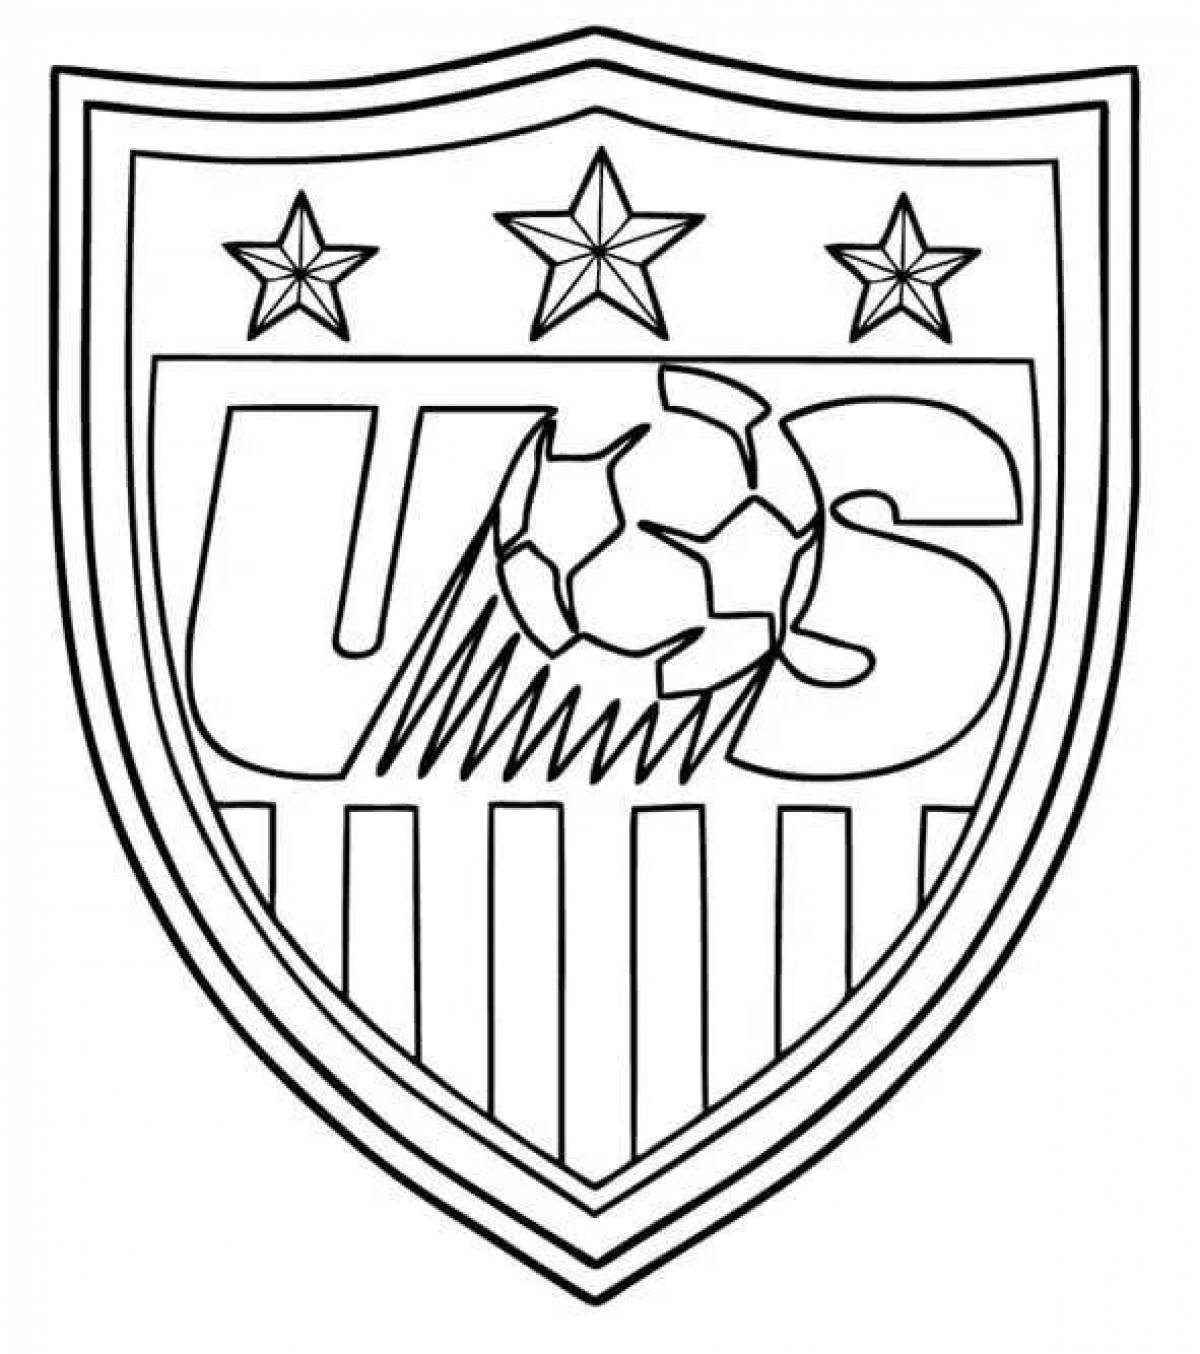 Football club emblems grand coloring page